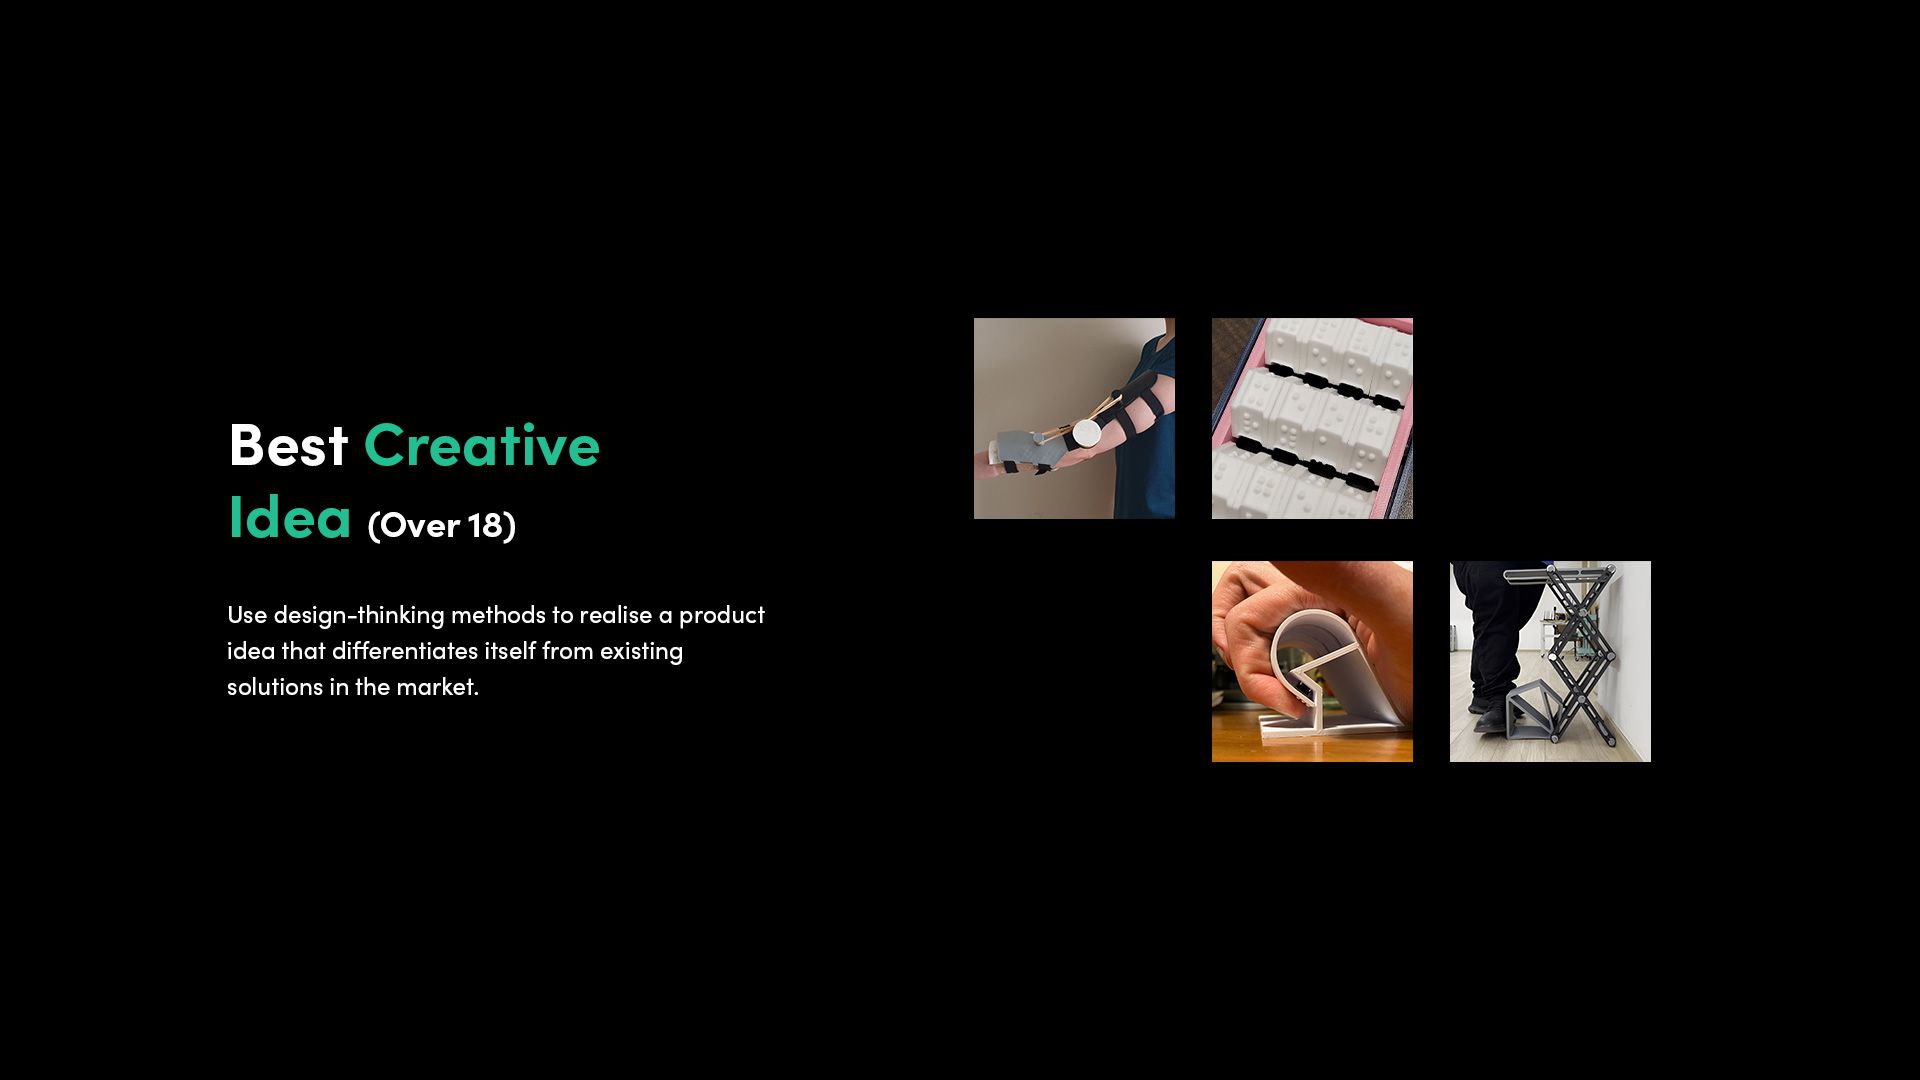 A selection of 3D printed assistive devices that made the finalist shortlist for the Make:able Challenge, in the category 'Best Creative Idea - Over 18'.